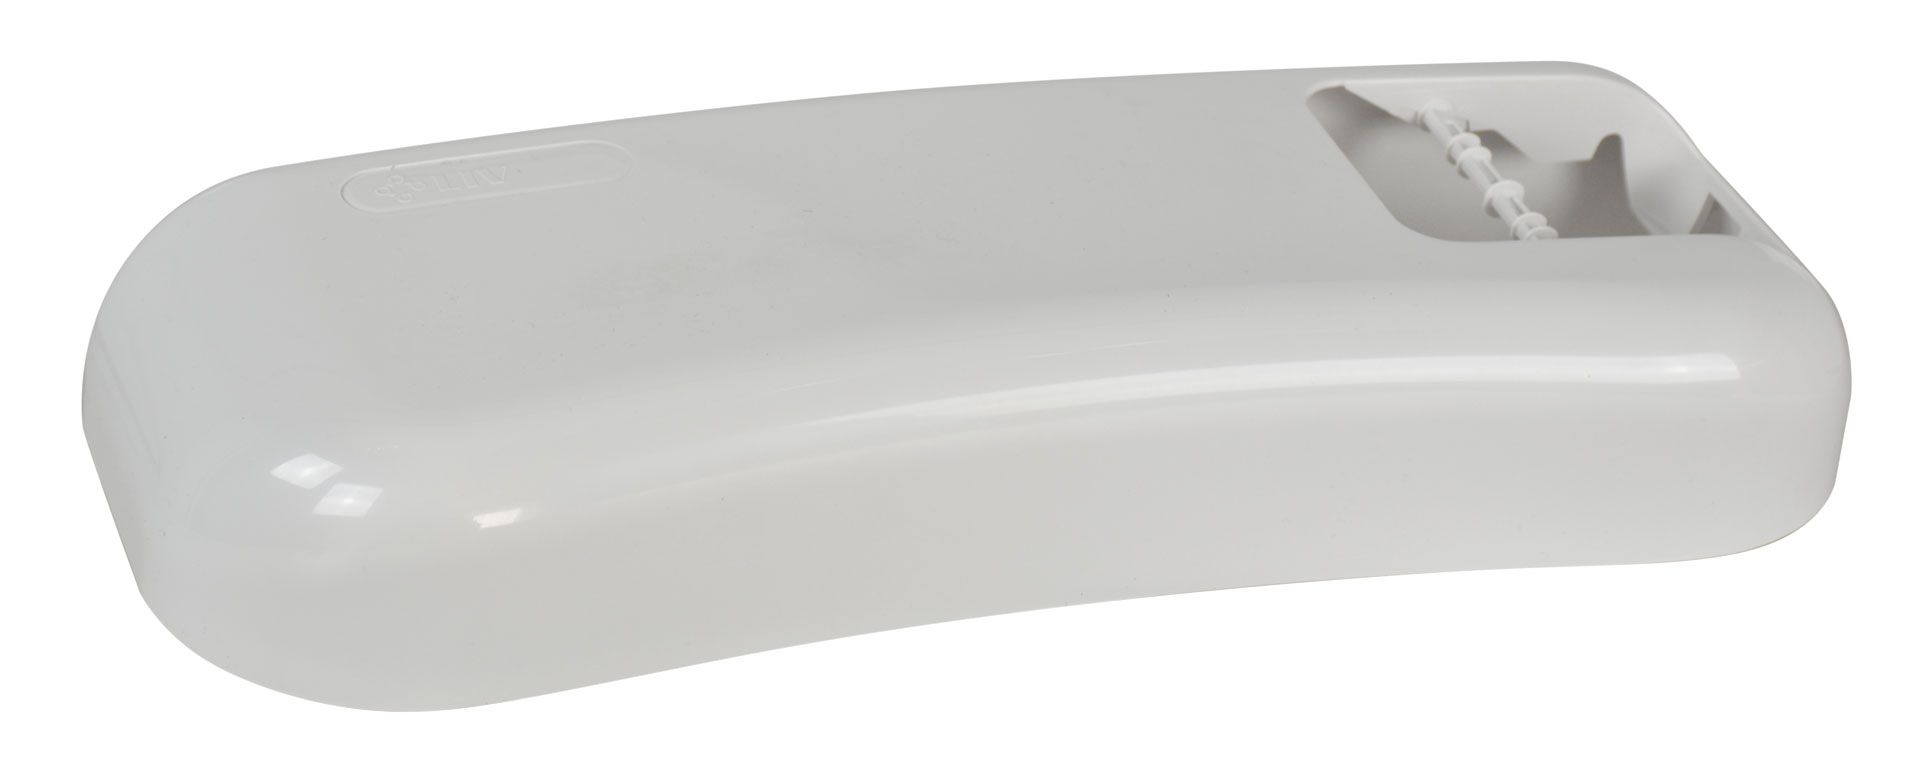 Cover lid, cisterns VISION/VISION DUO, white